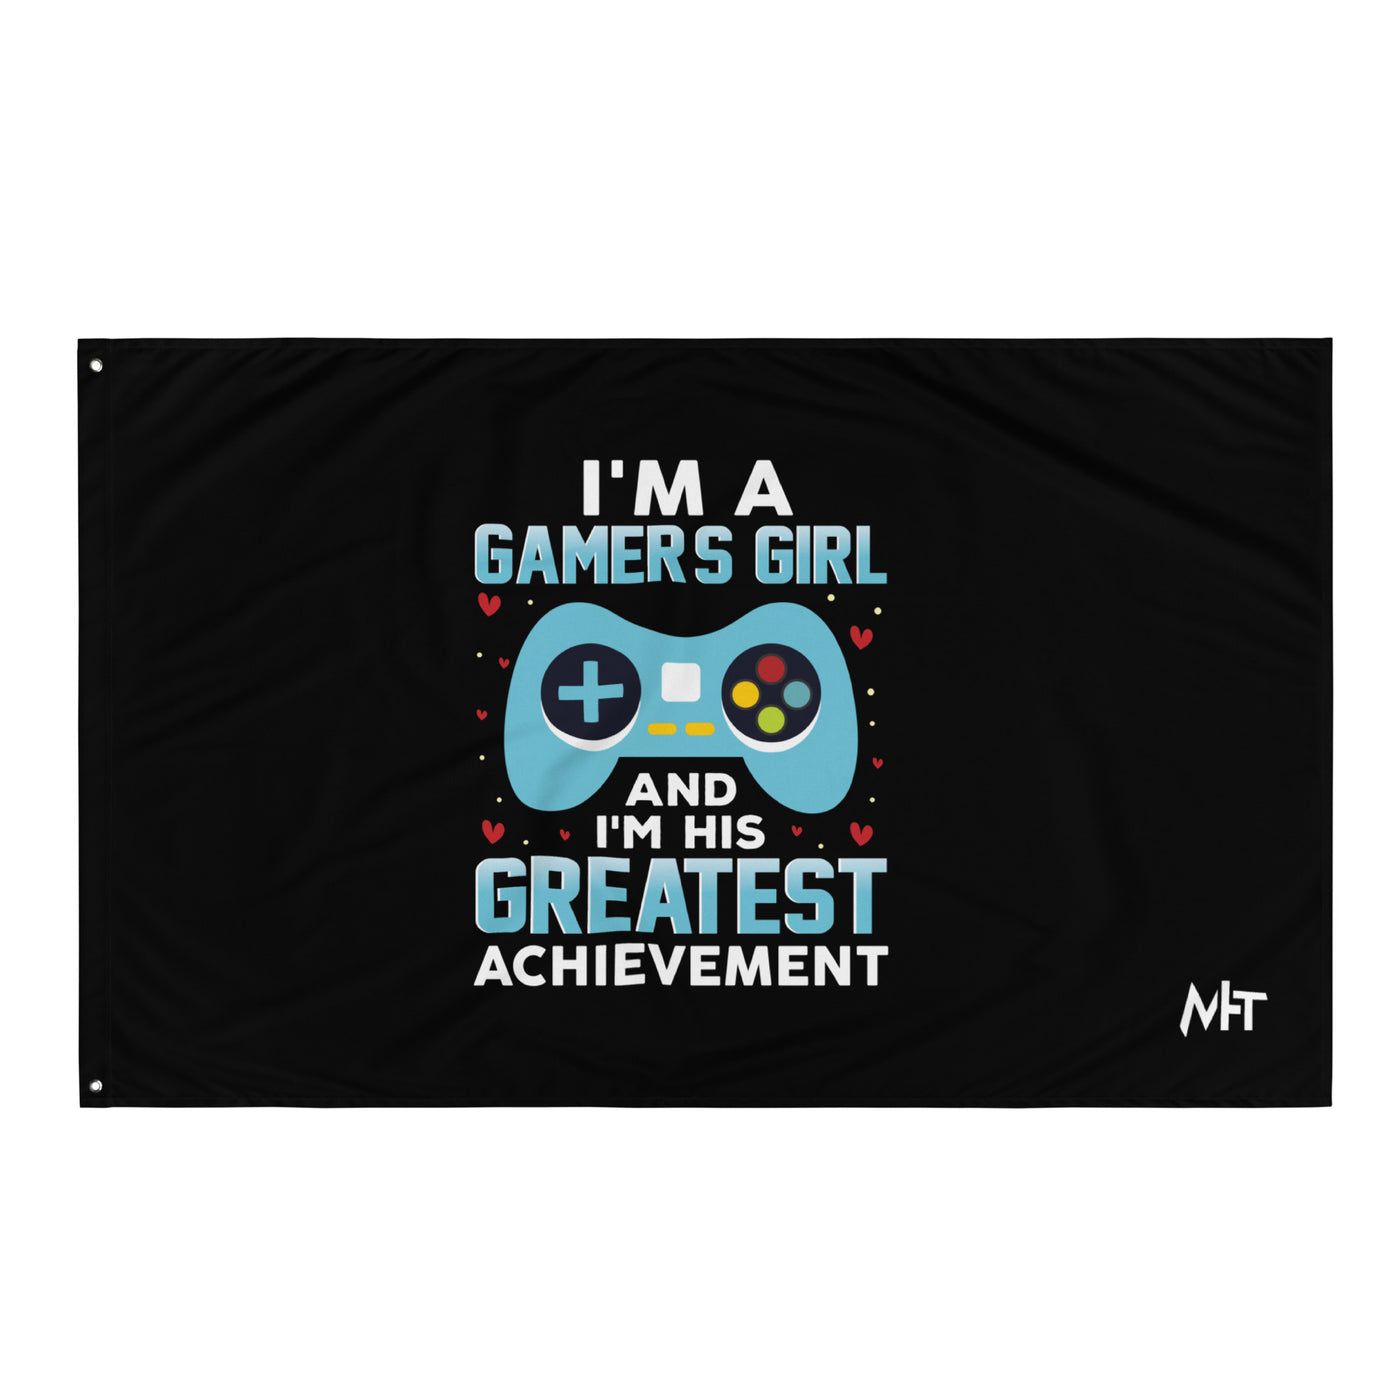 I am a Gamer's Girl, I am his Greatest Achievement (turquoise text ) - Flag